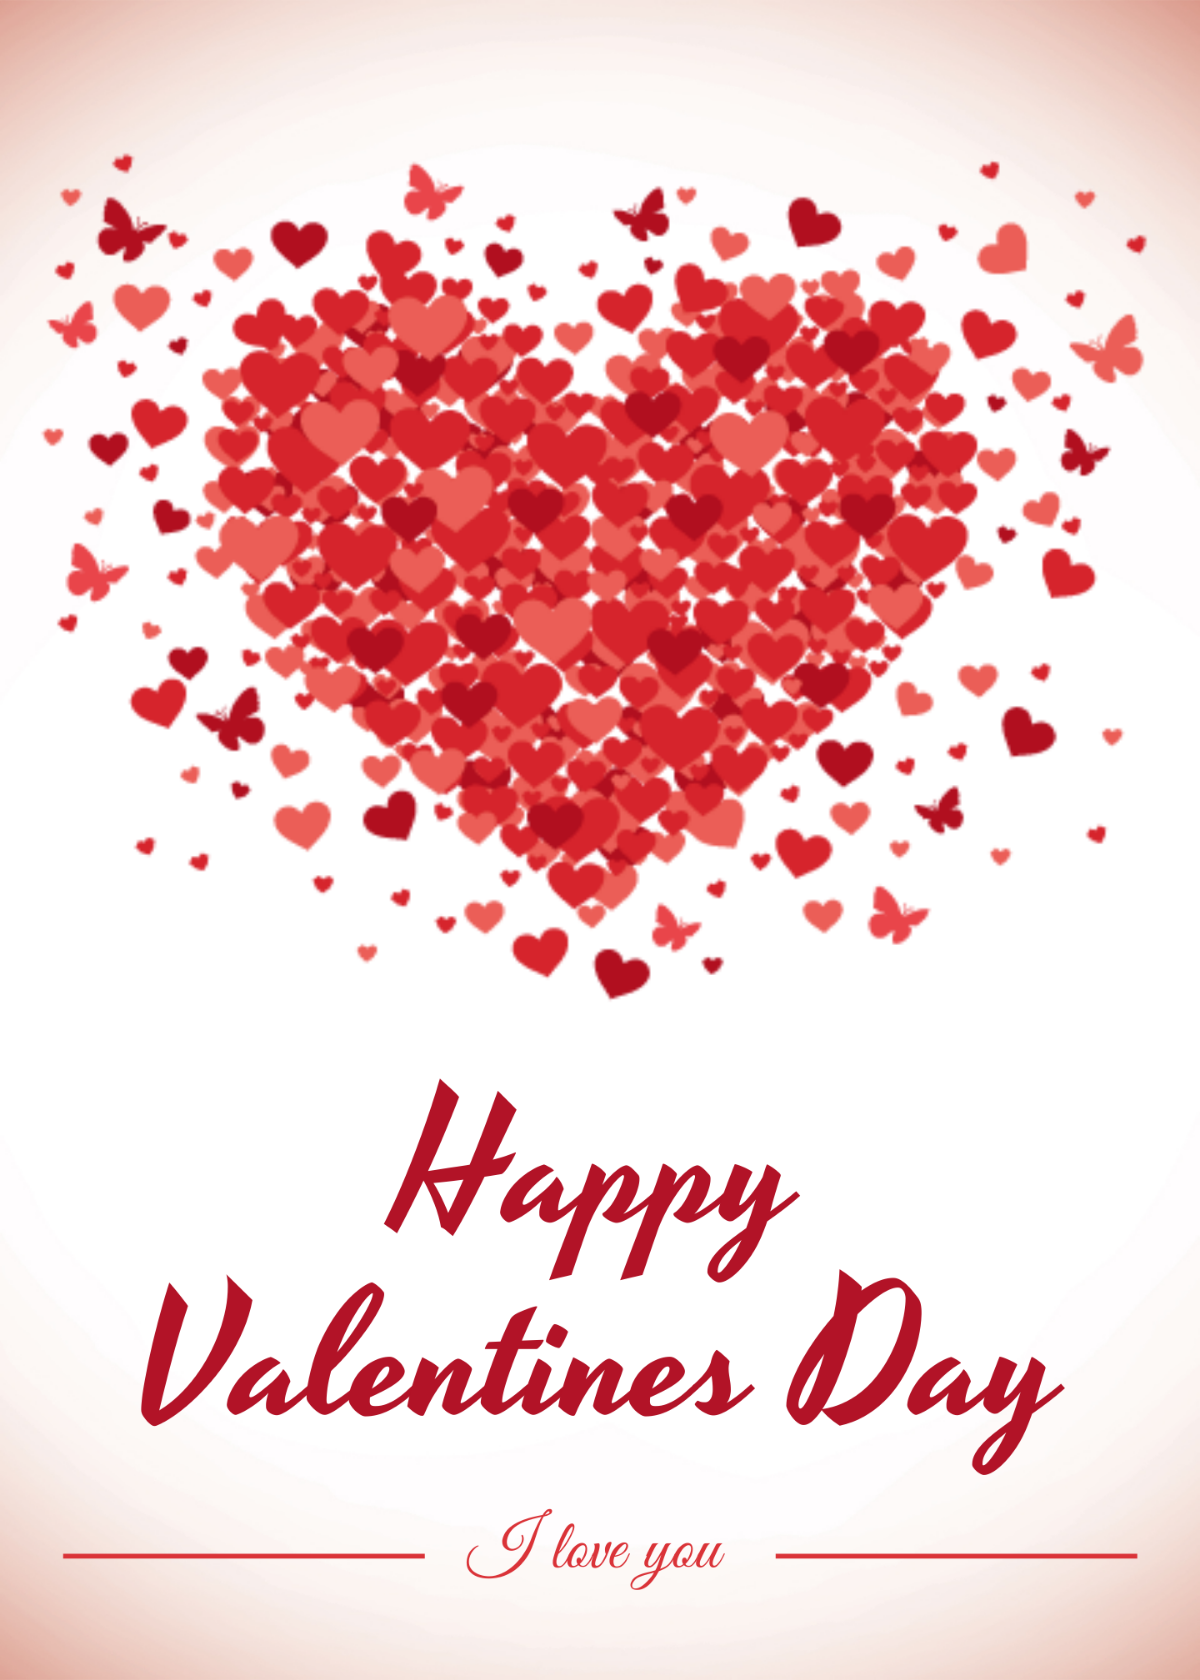 Happy Valentine's Day Greeting Card Template